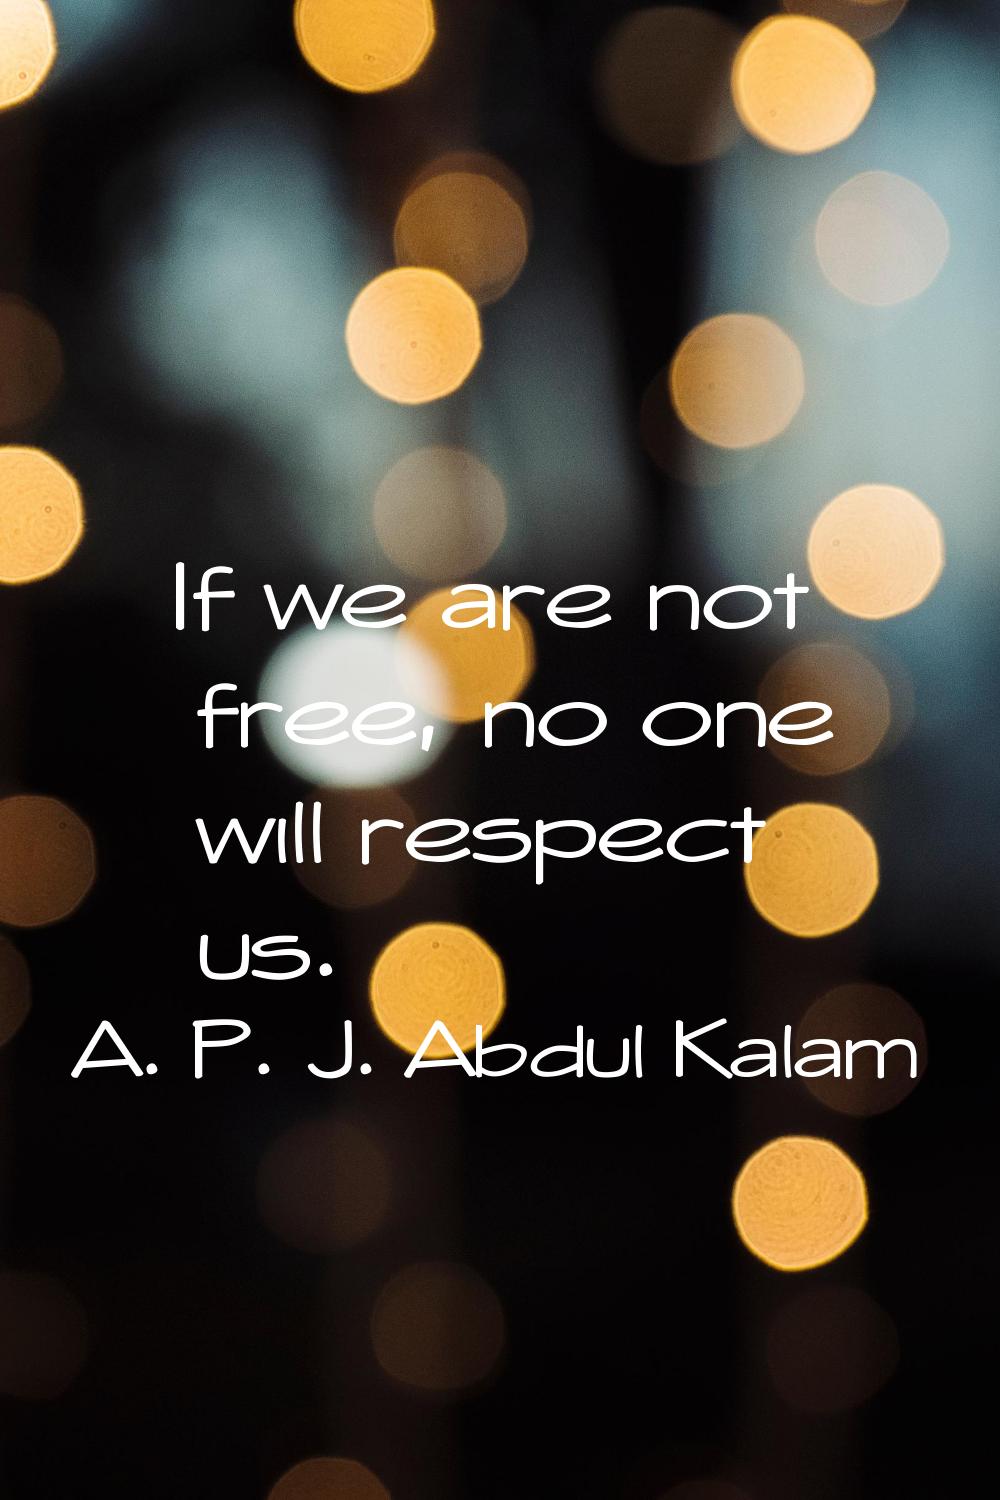 If we are not free, no one will respect us.